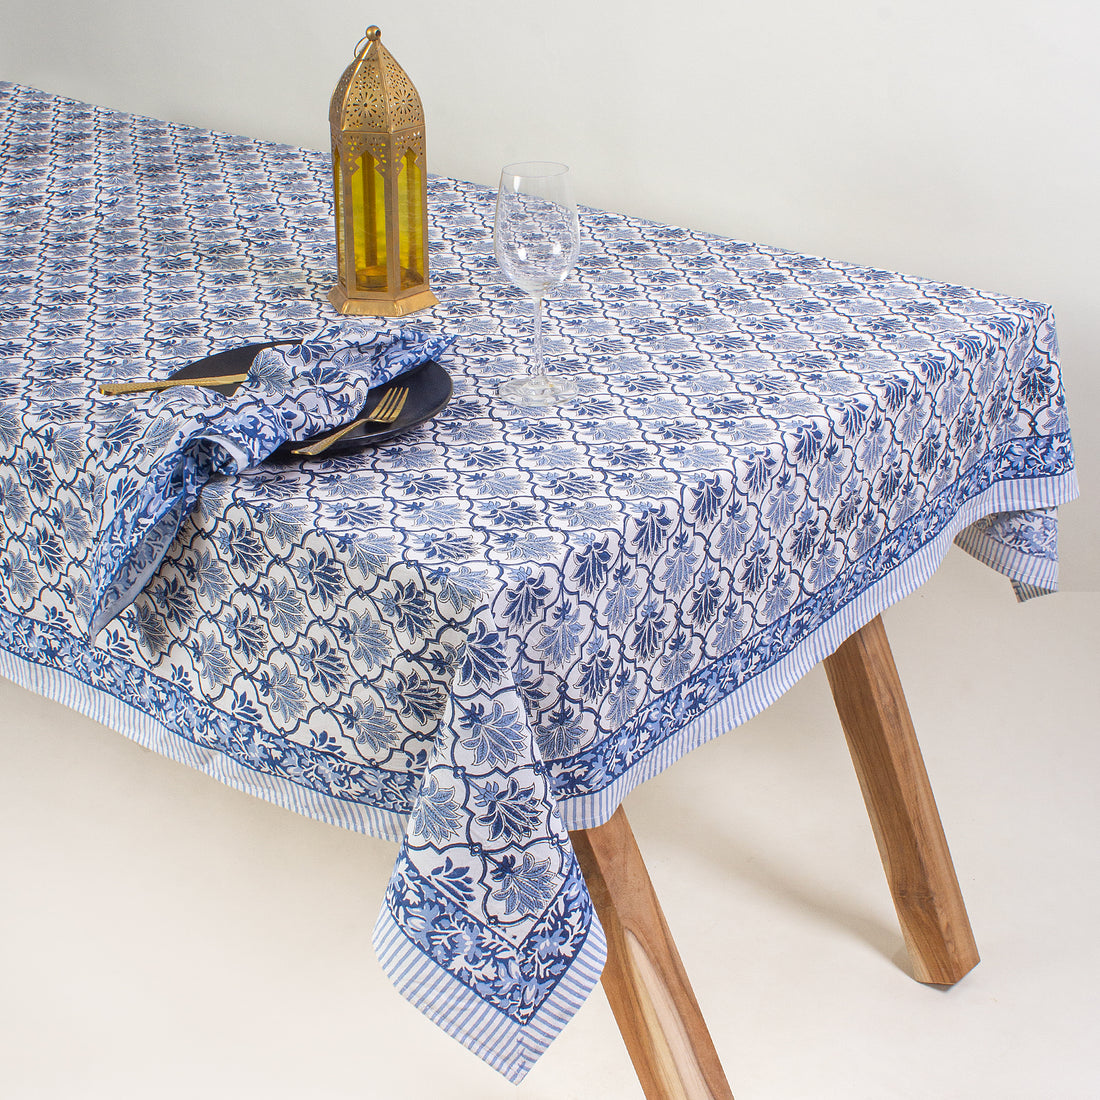 Dining Table Cover 6 Seater With Cotton Napkins Online